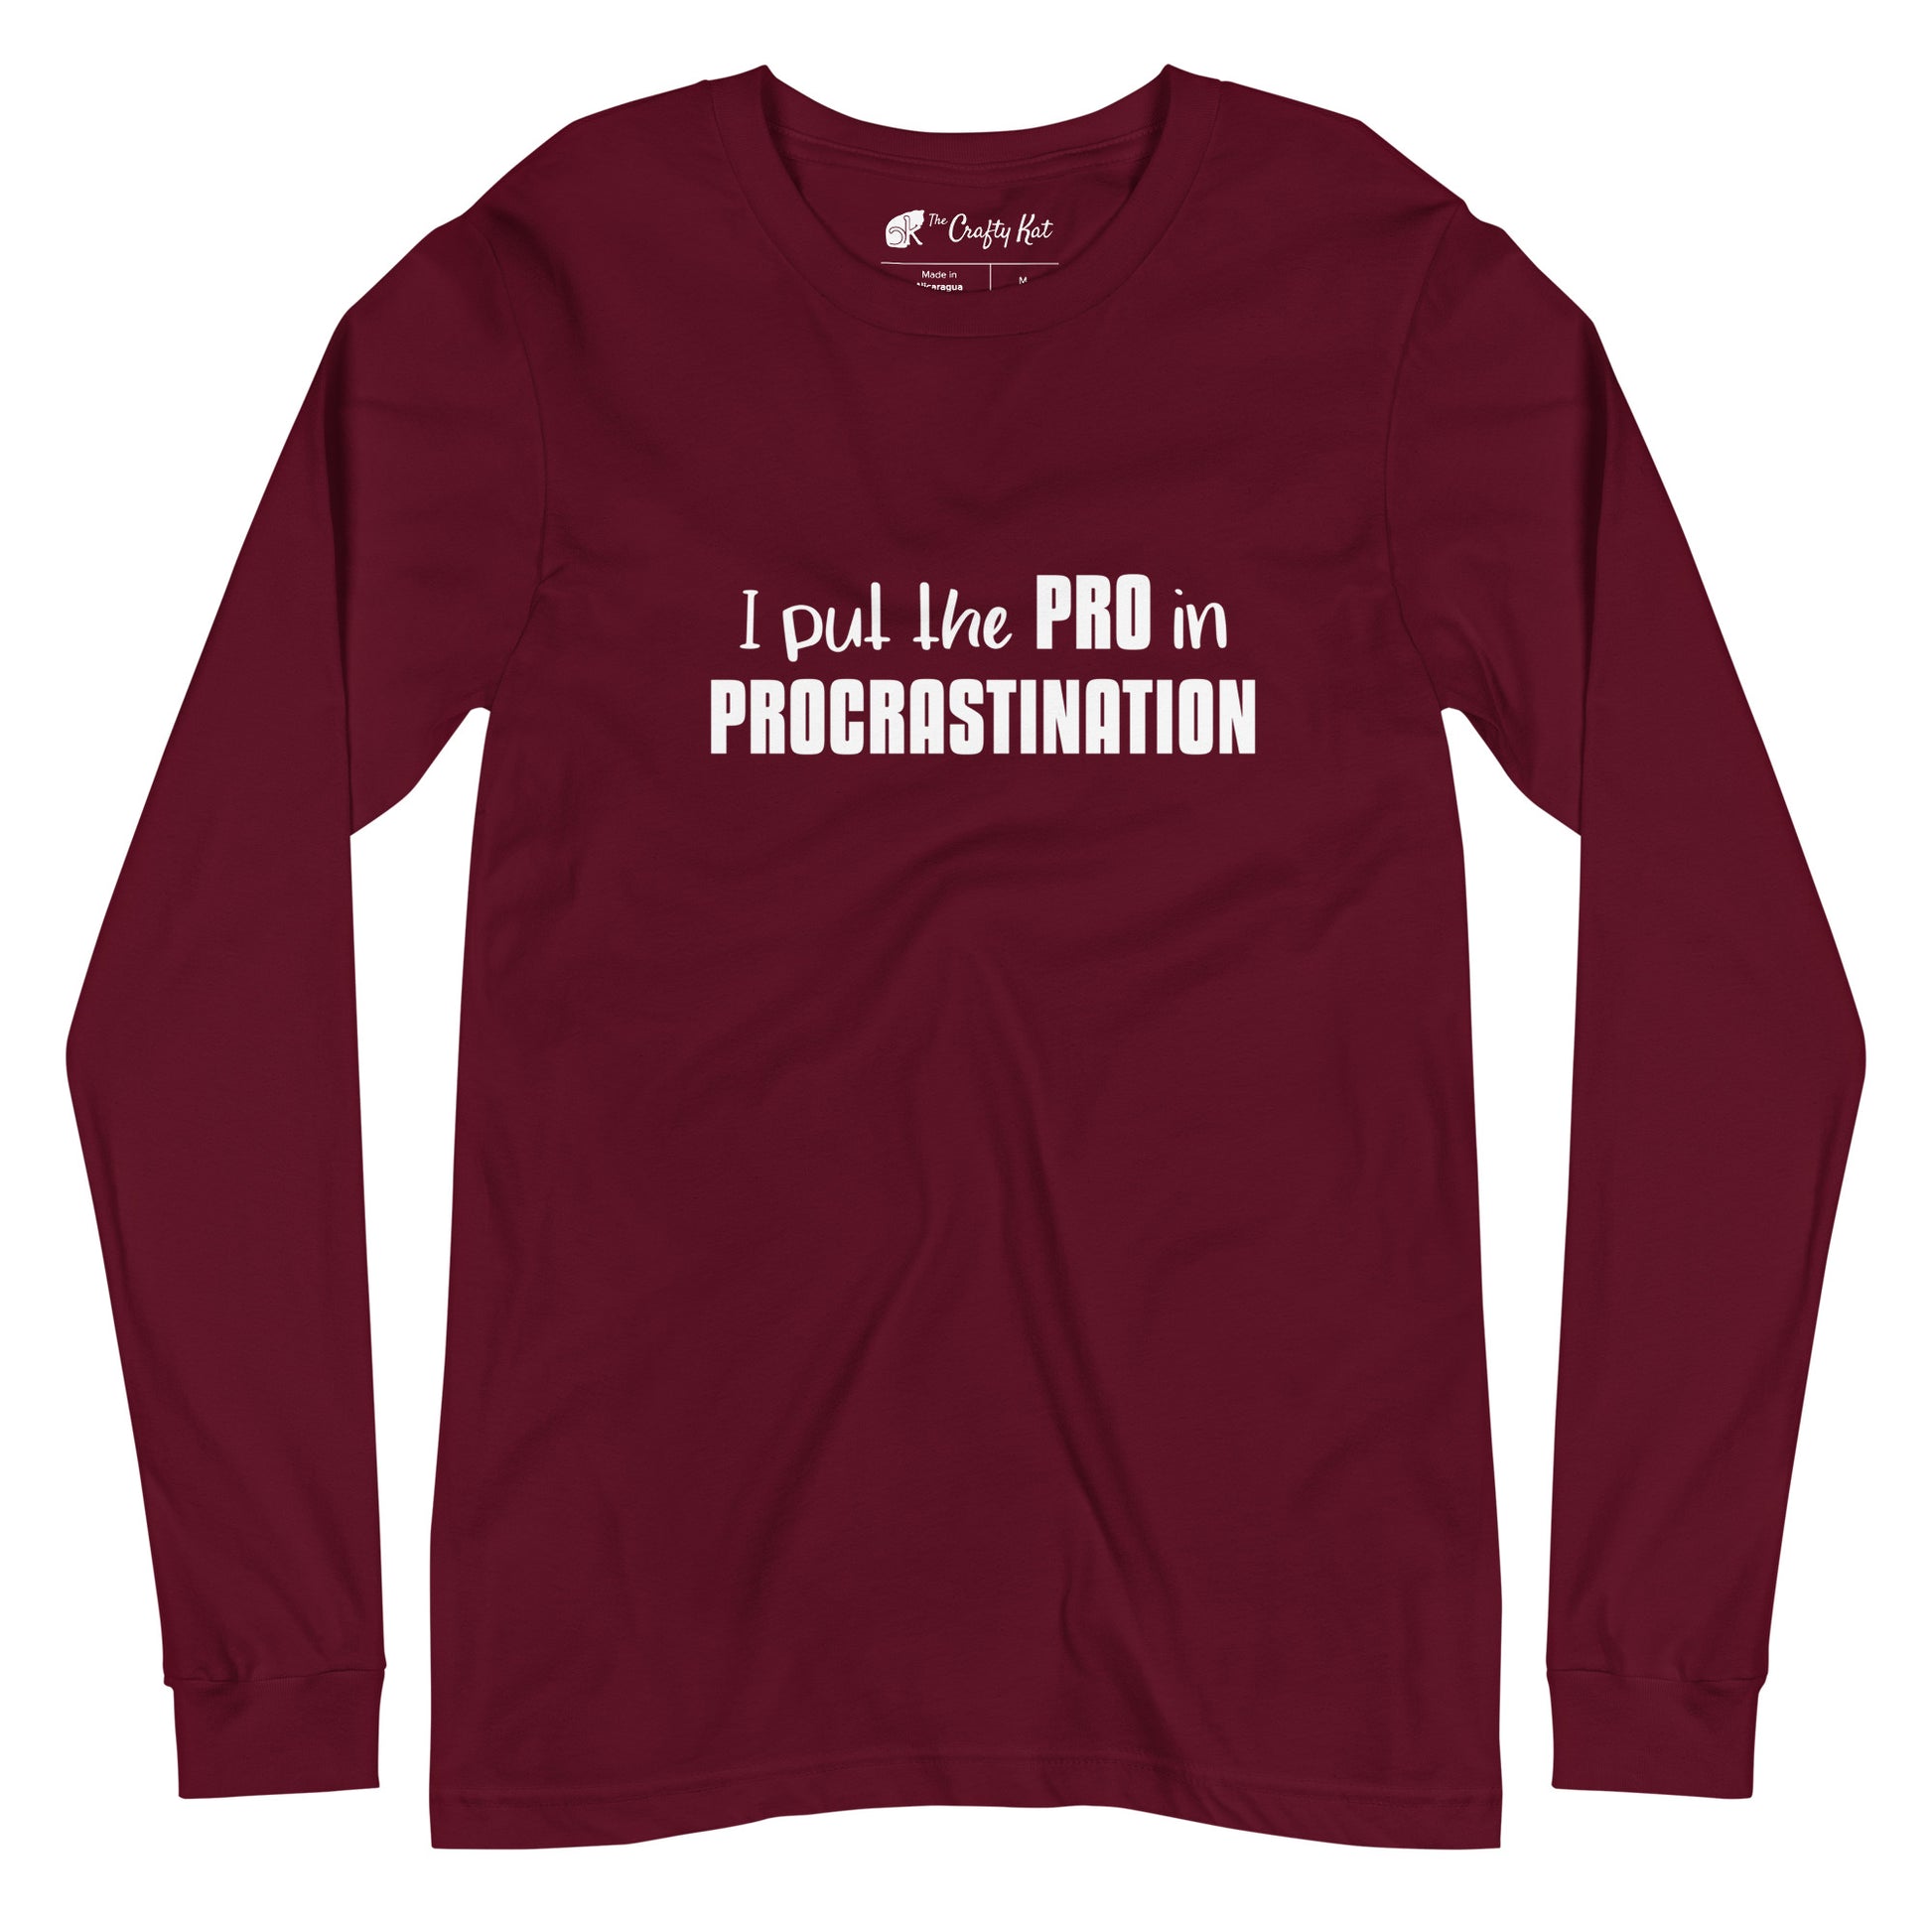 Maroon long-sleeve shirt with text graphic: "I put the PRO in PROCRASTINATION"